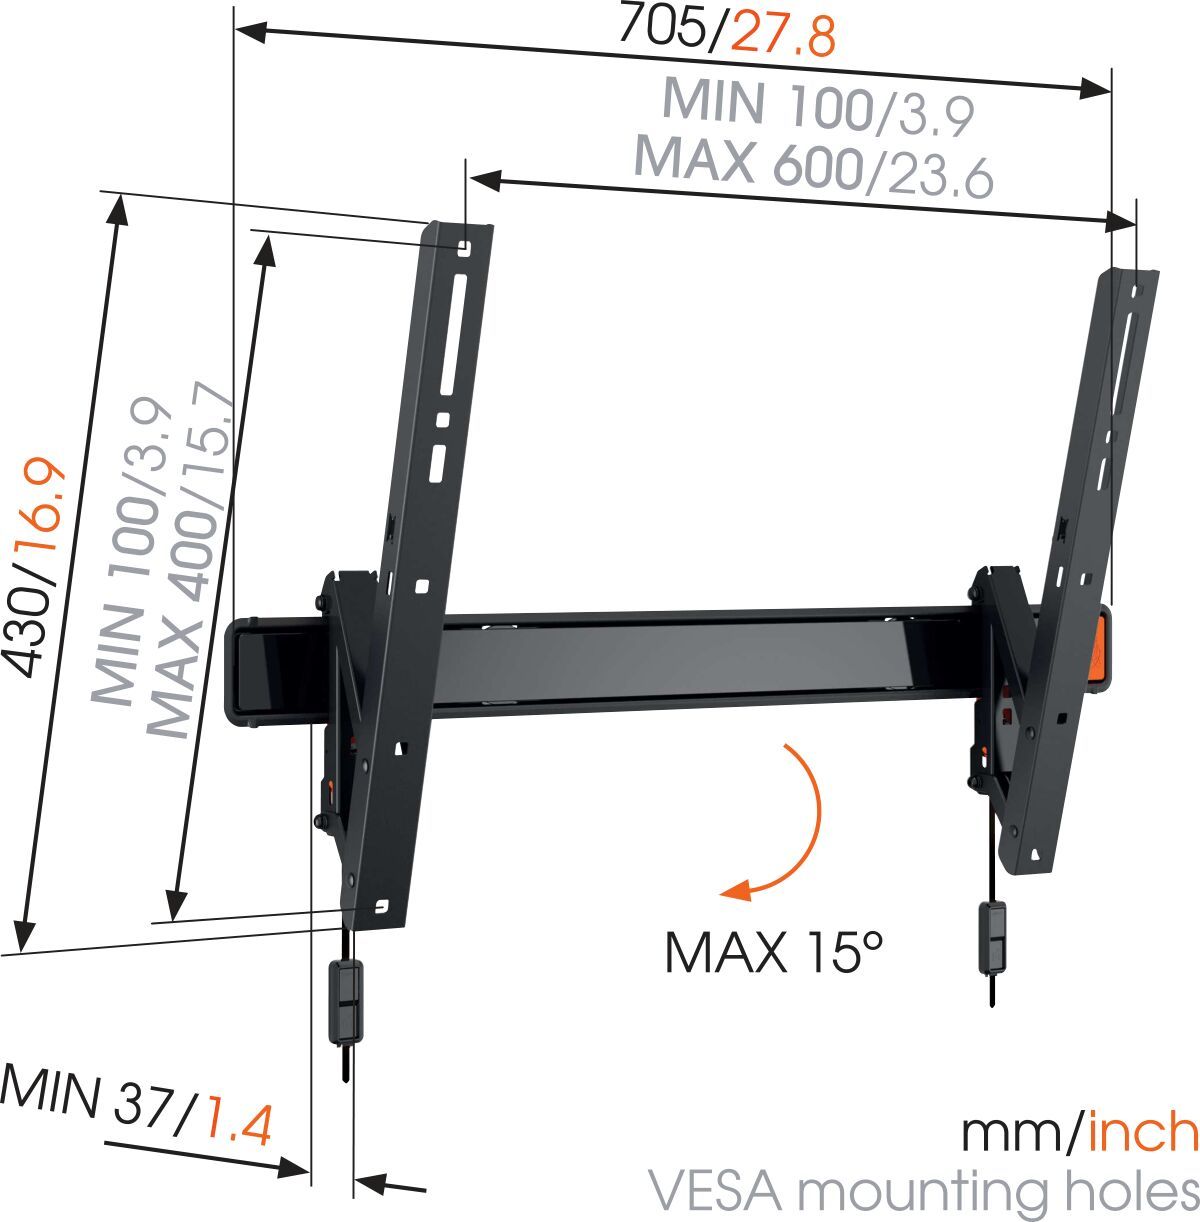 Vogel's WALL 2315 Tilting TV Wall Mount - Suitable for 40 up to 65 inch TVs up to Tilt up to 15° - Dimensions